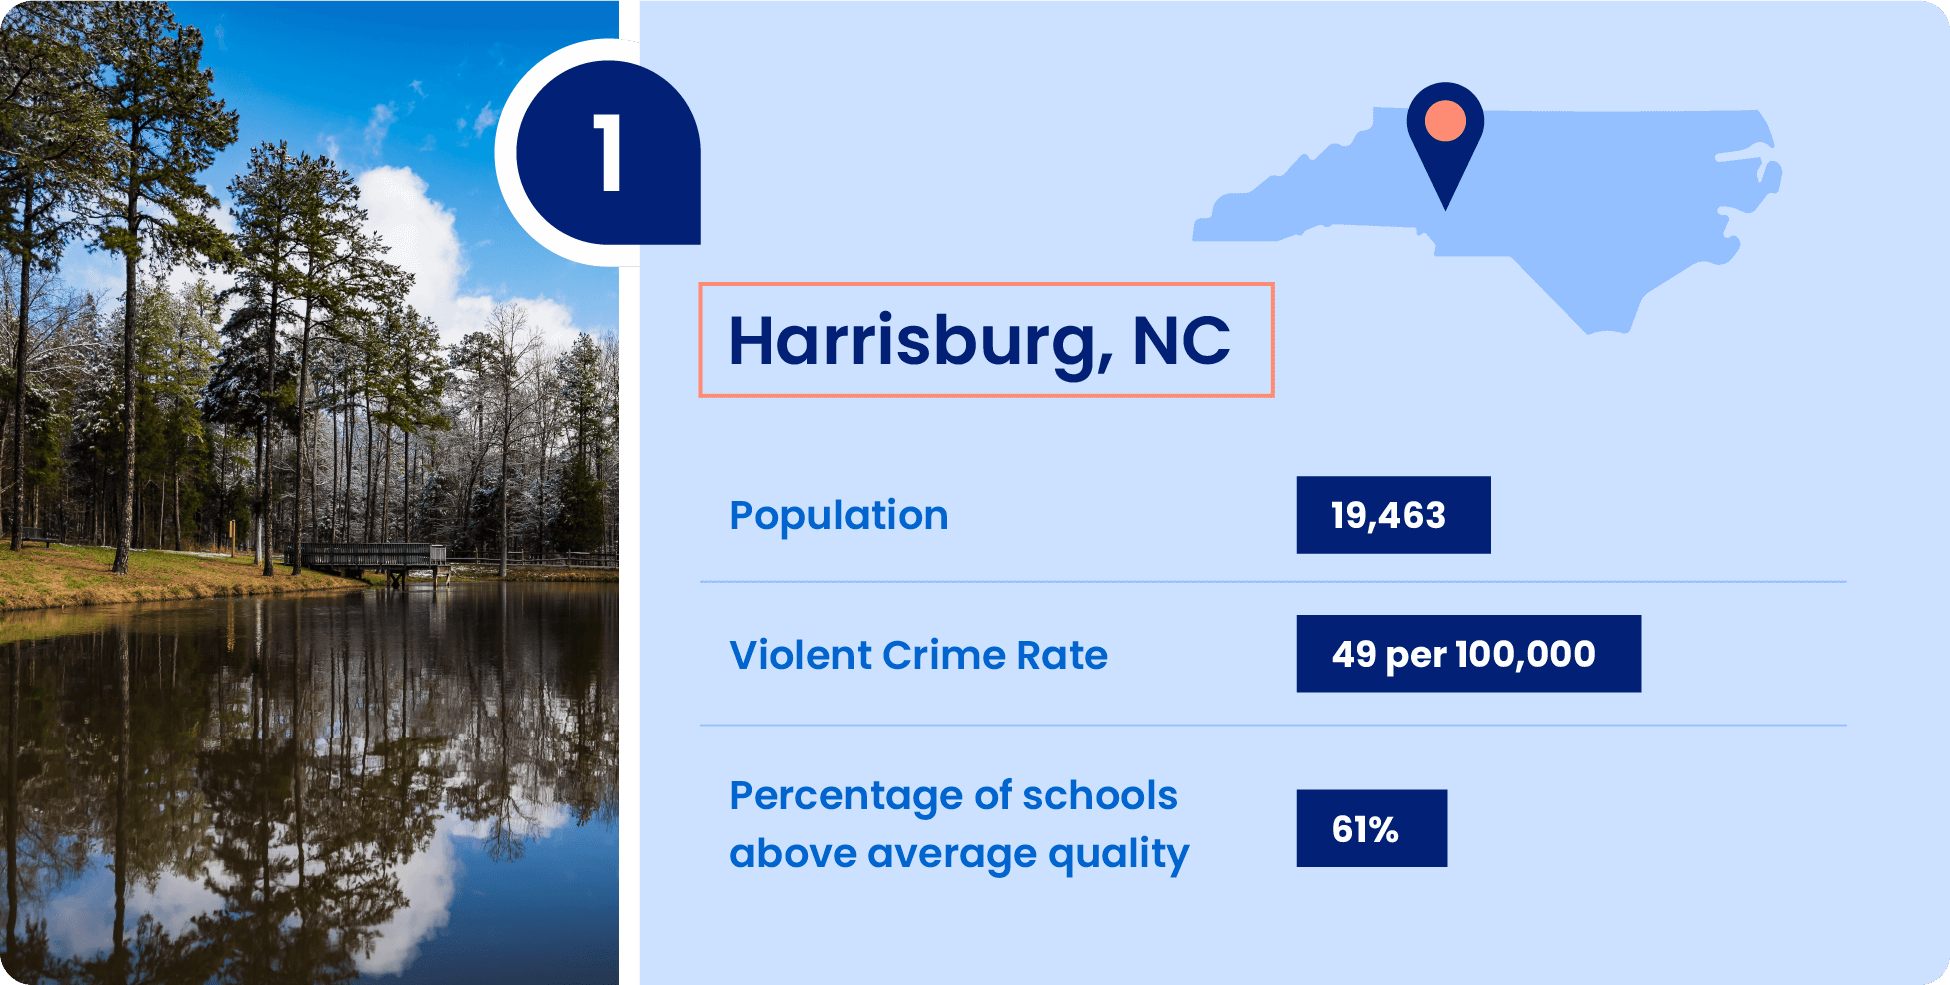 Image shows key information that make Harrisburg, North Carolina a great place to raise a family.